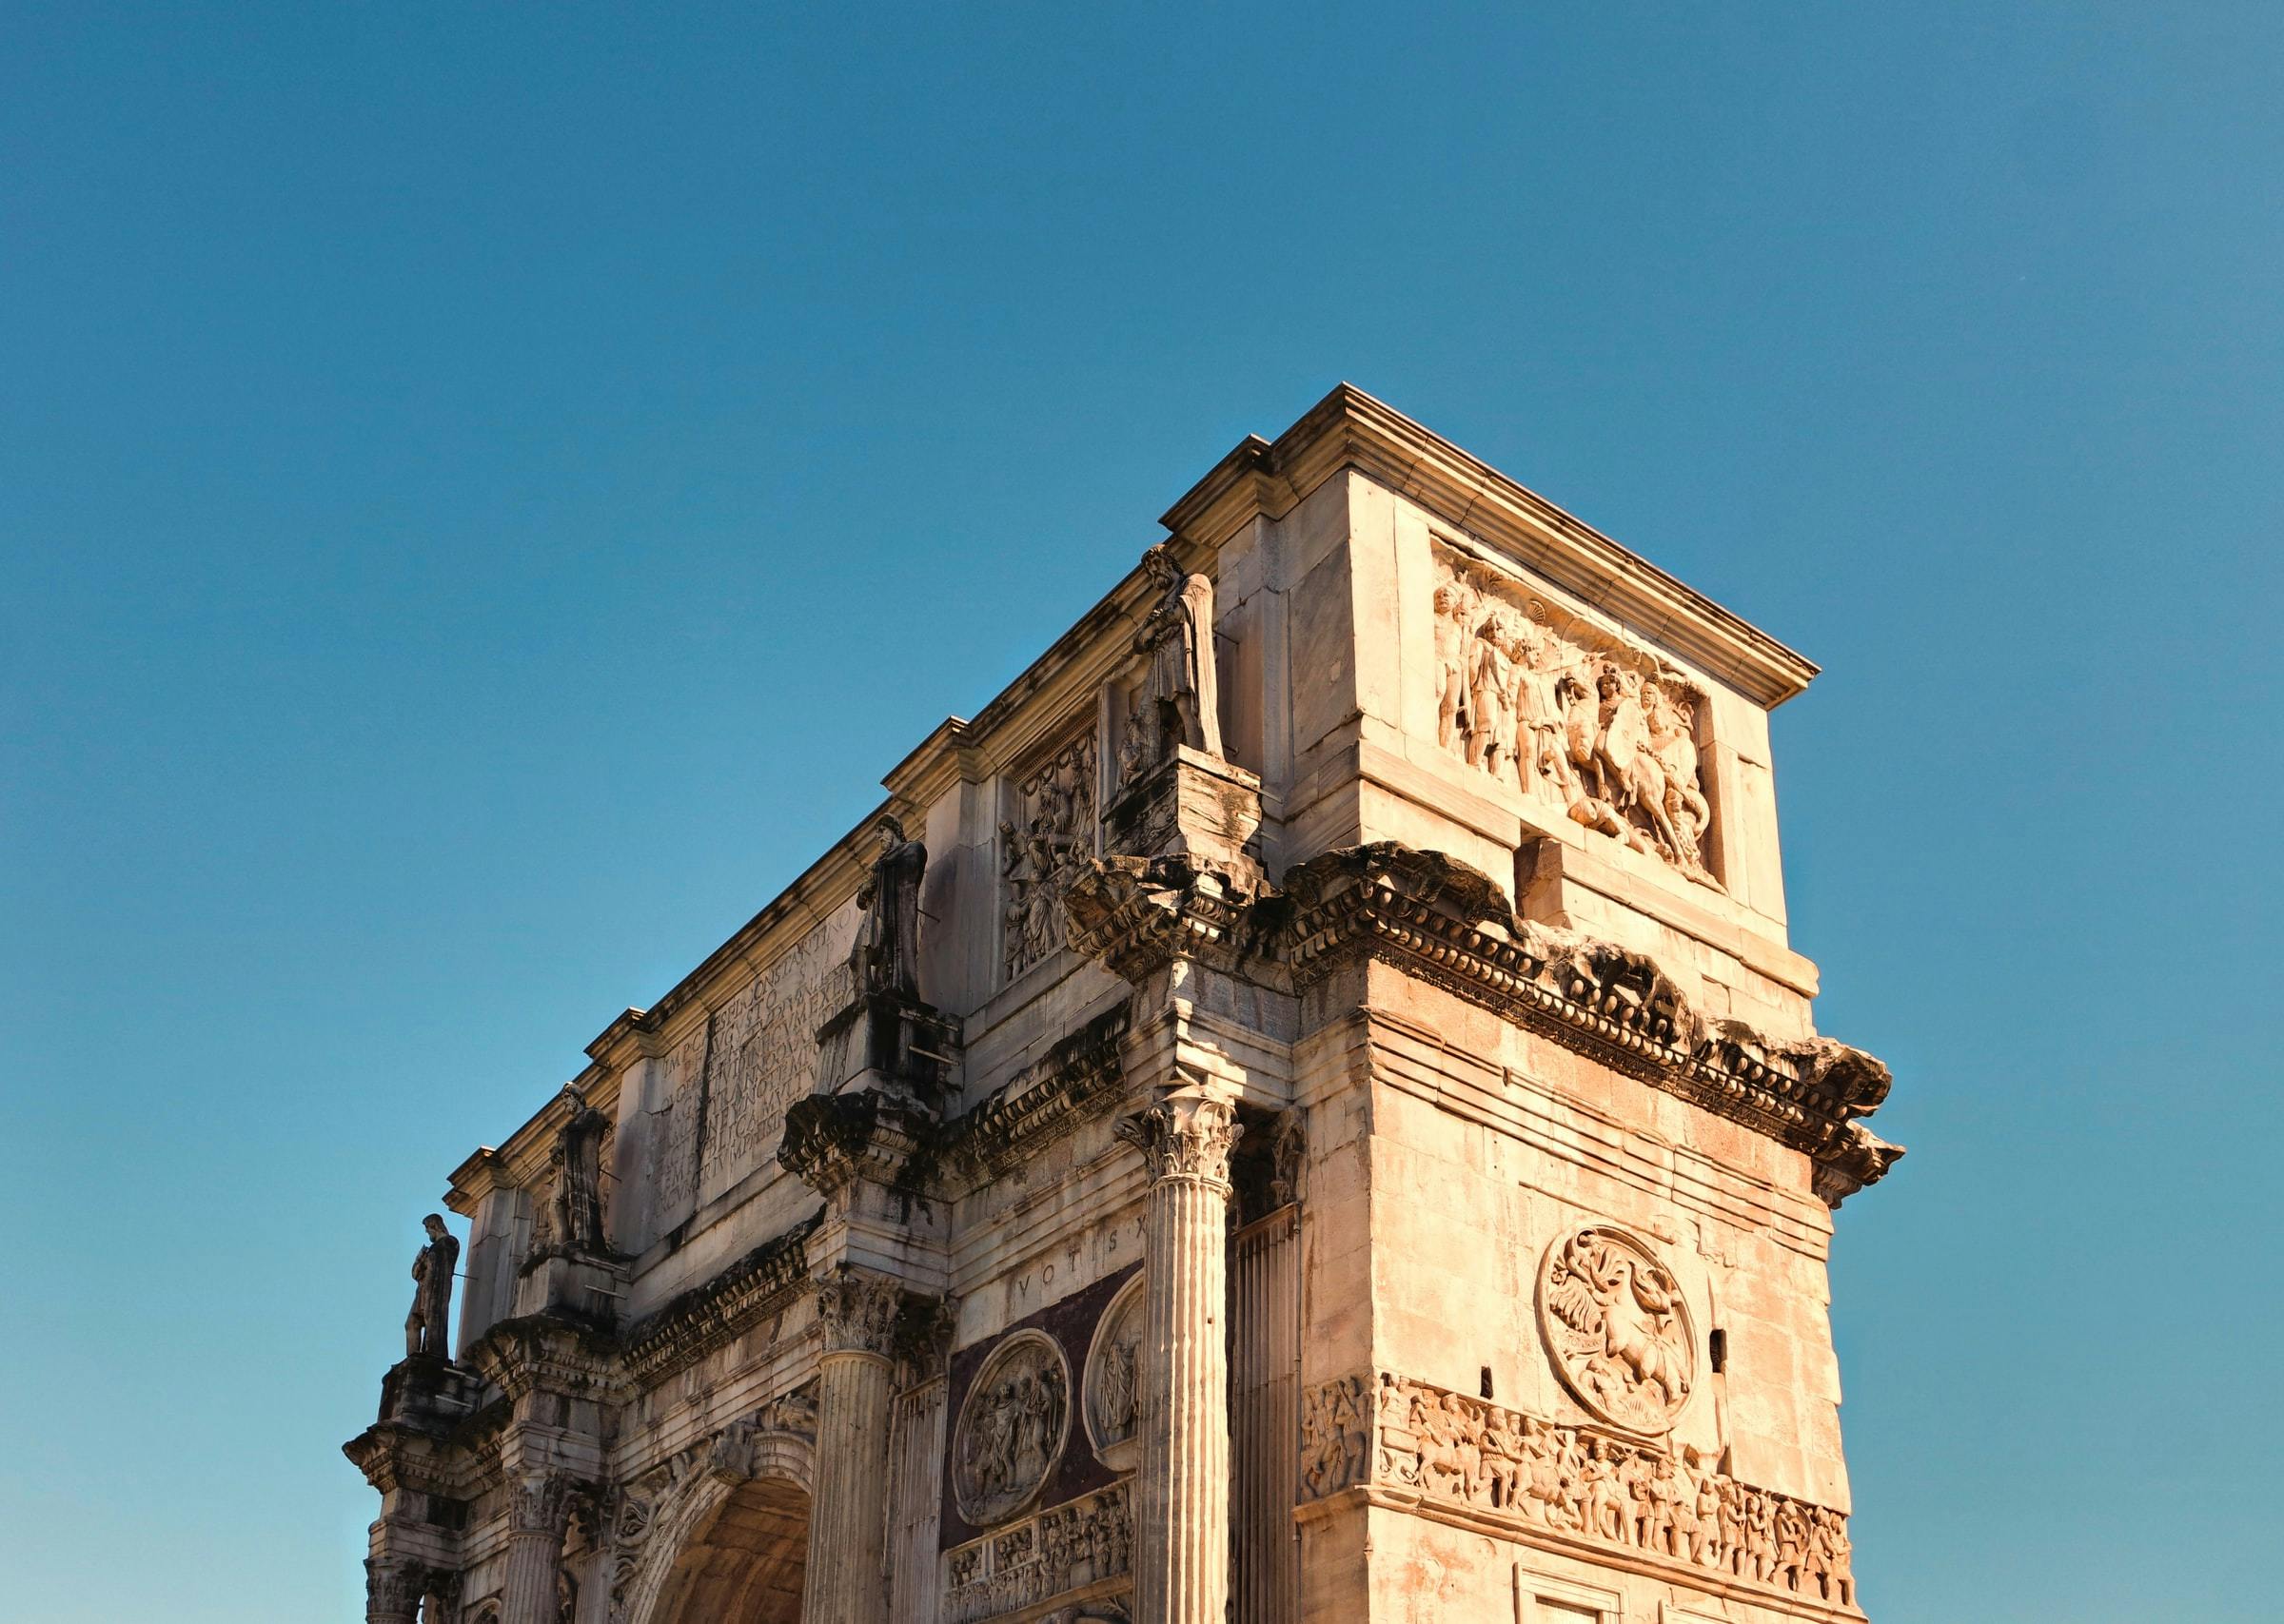 The Arch of Constantine in Rome is a notable example of Spolia, holding several fragments from periods of earlier emperors.